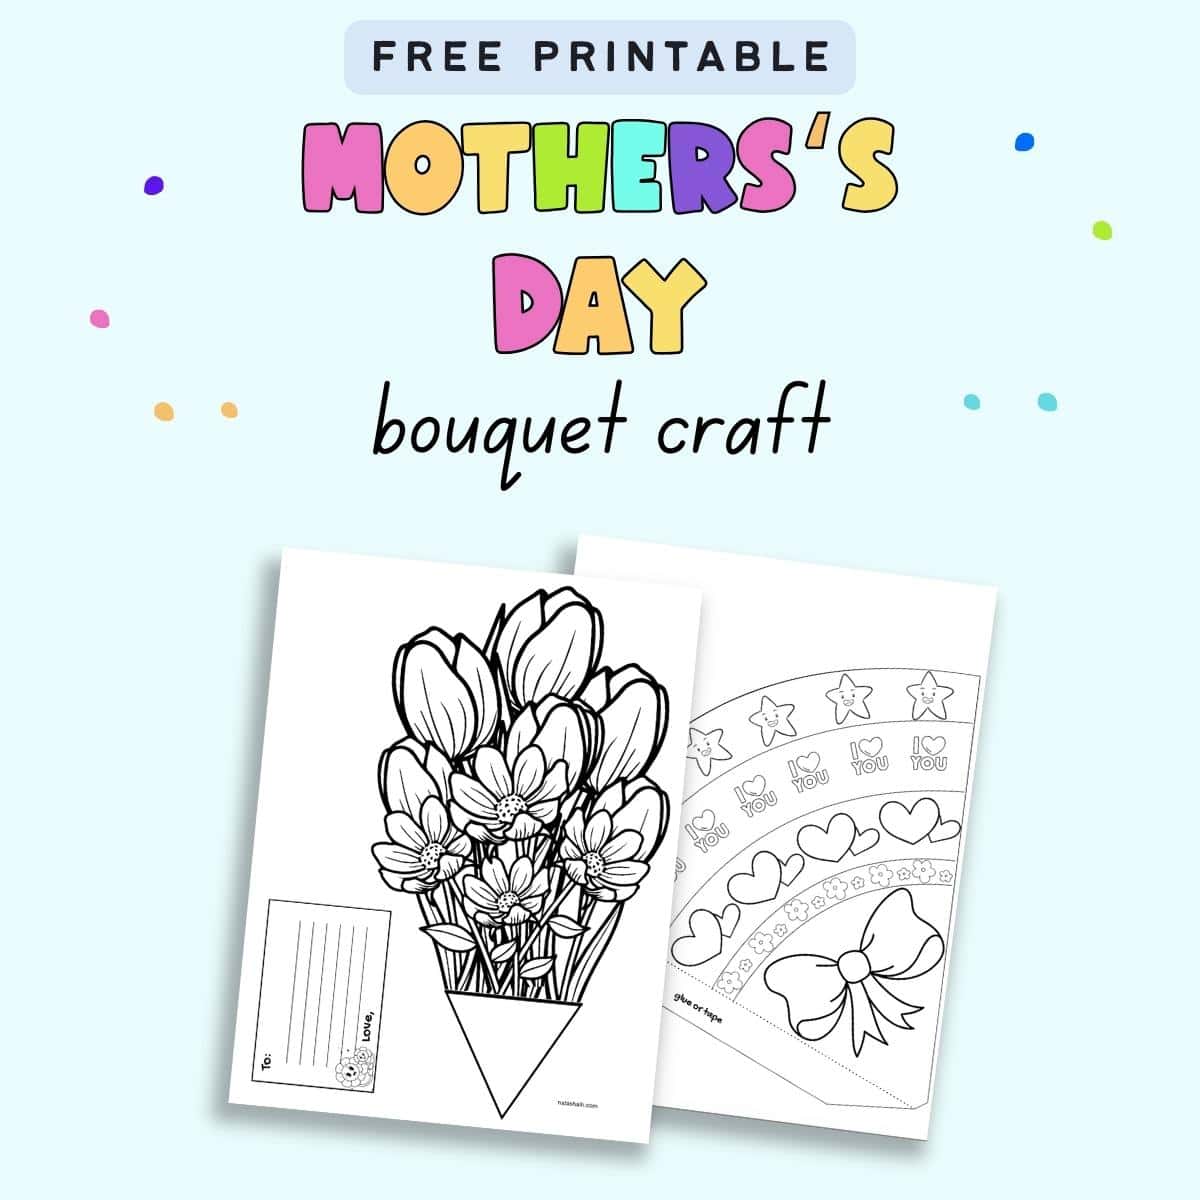 Text "free printable Mother's Day bouquet craft" with a preview of two printable pages